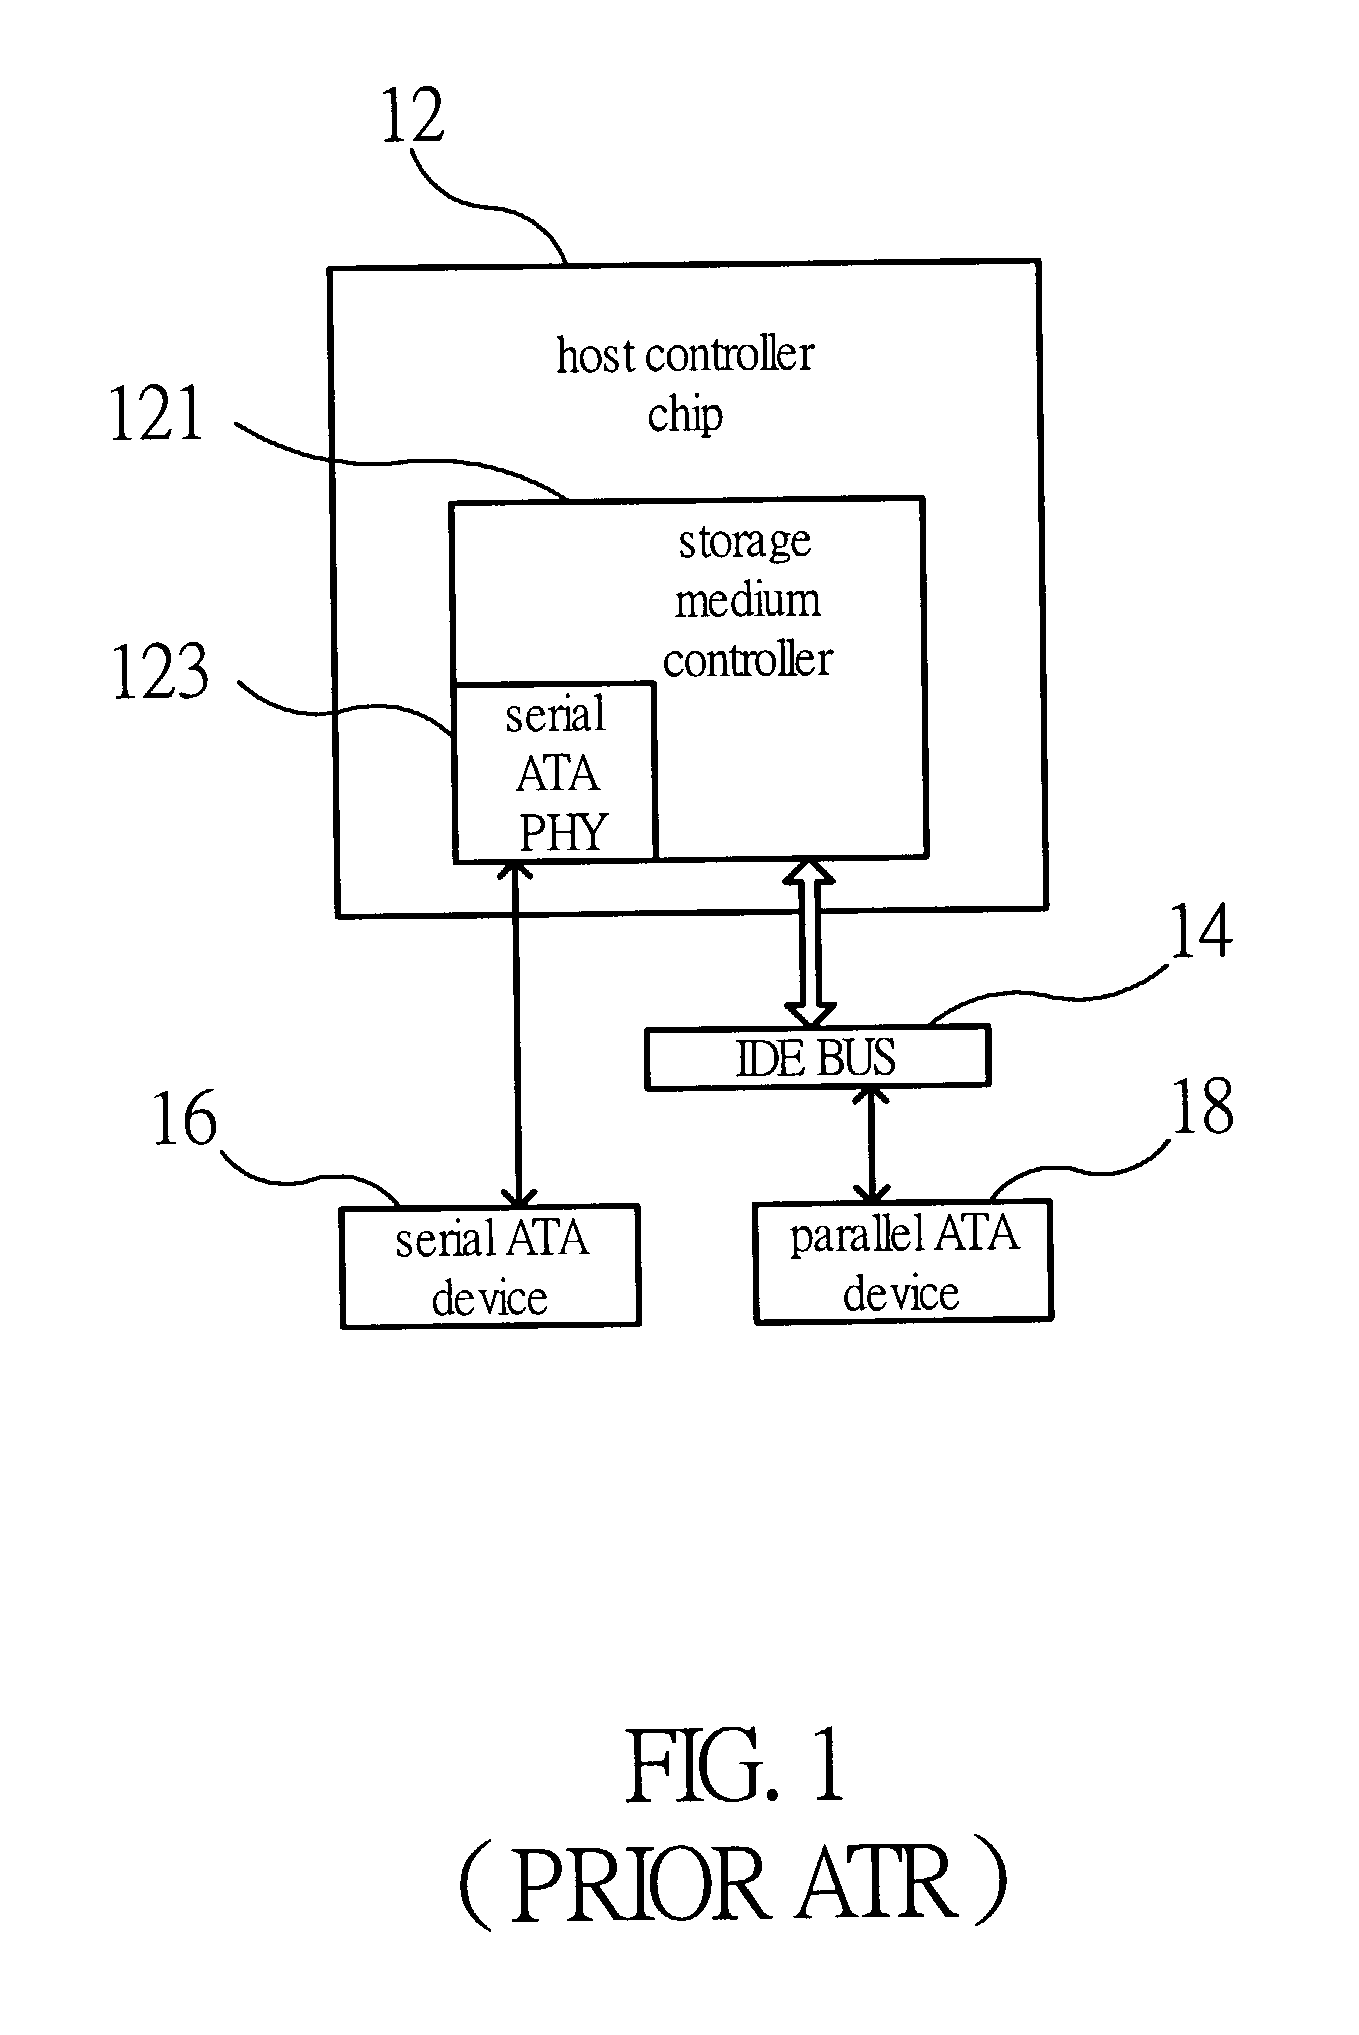 Circuit and signal encoding method for reducing the number of serial ATA external PHY signals